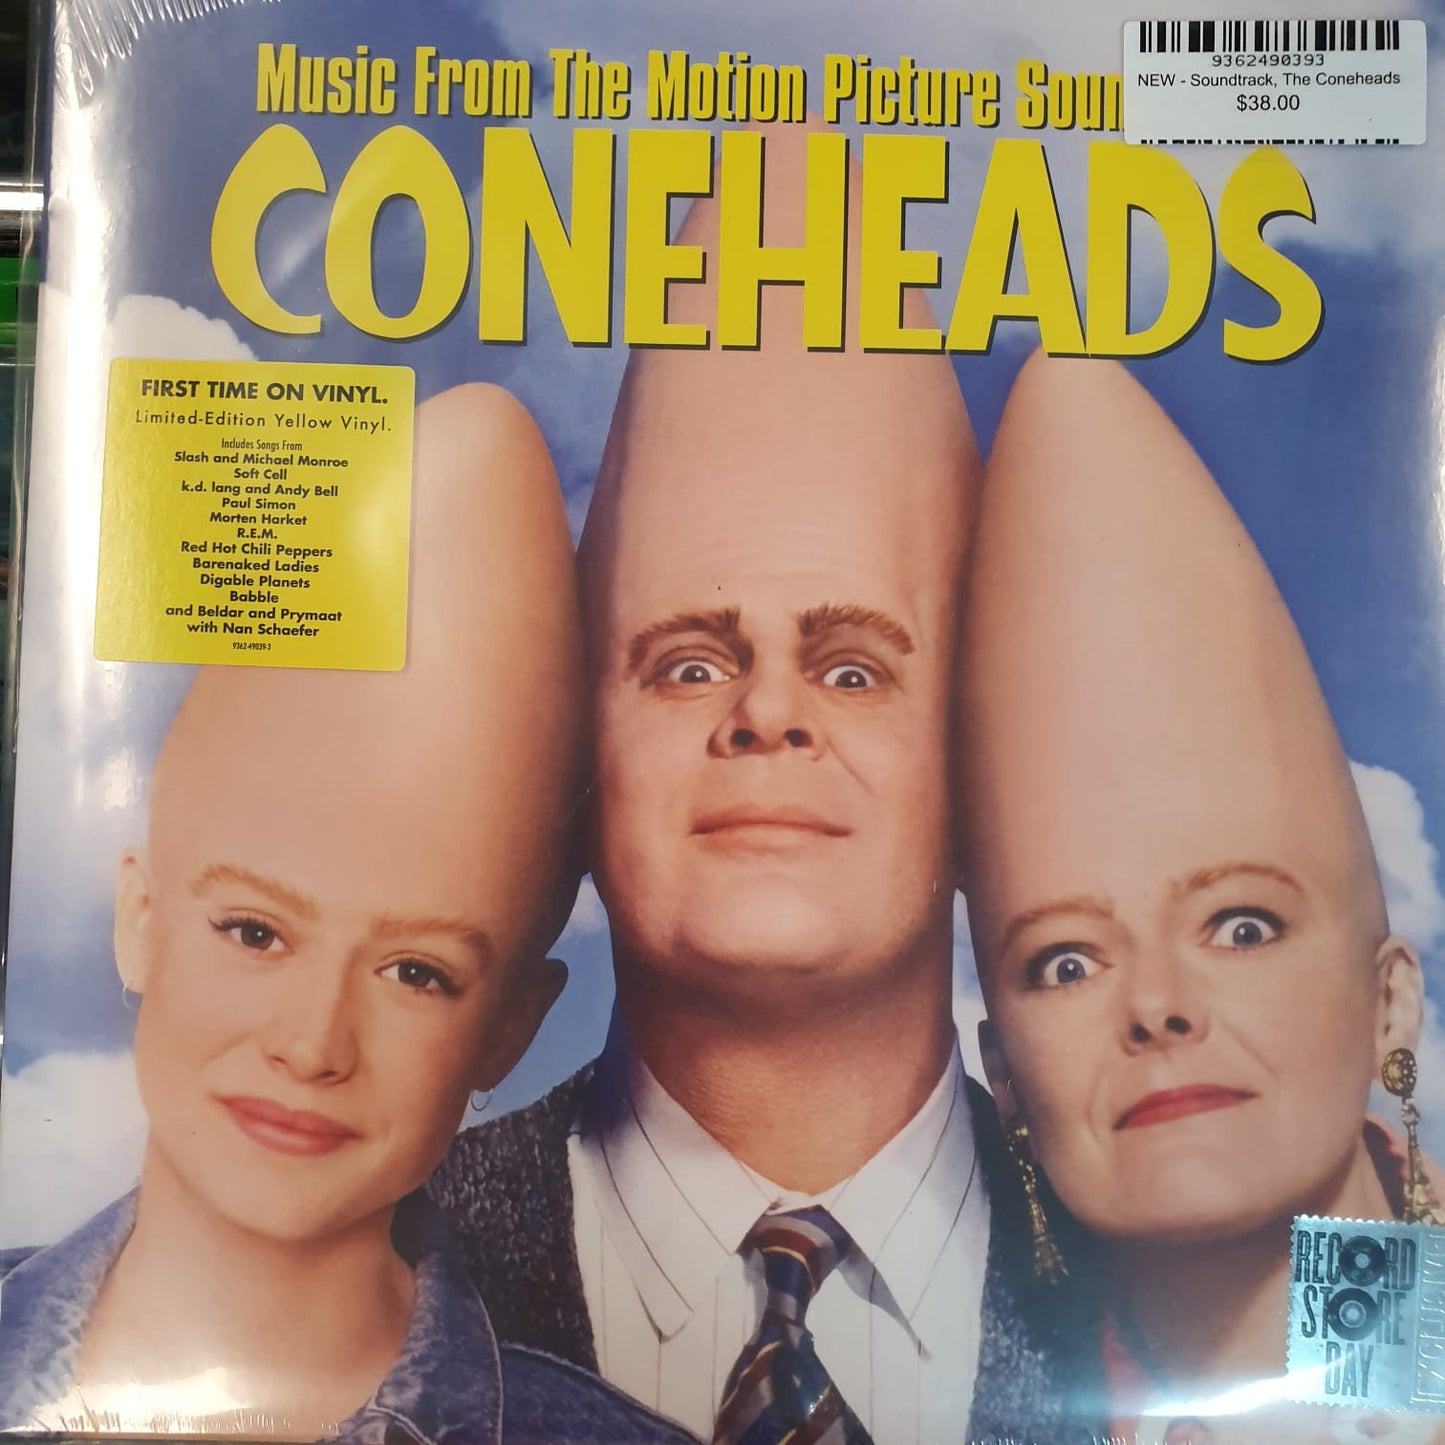 NEW - Soundtrack, The Coneheads OST